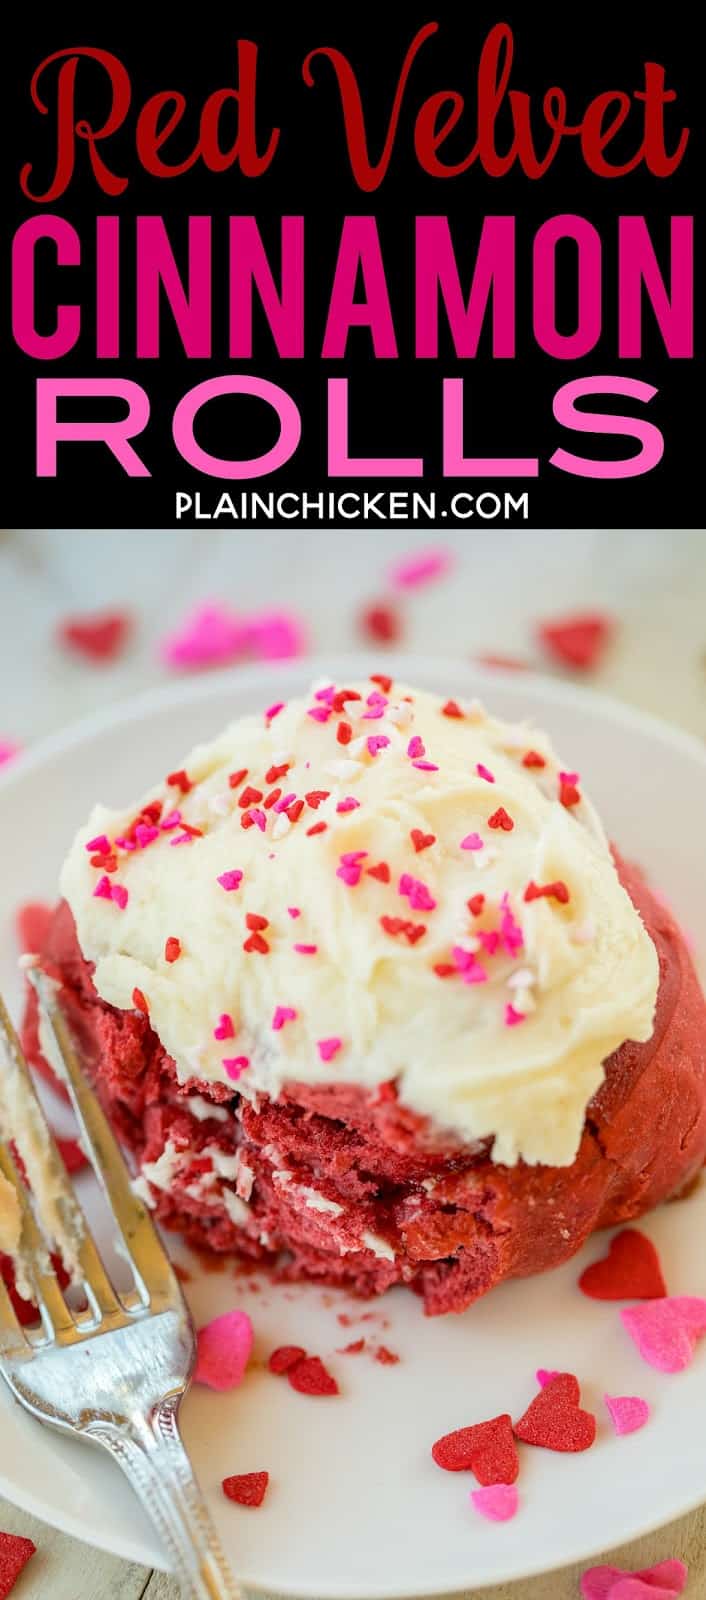 Red Velvet Cinnamon Rolls - TO-DIE-FOR delicious!!! SO easy! Start with a box of cake mix and add flour, water, and yeast. Bake and top with an amazing homemade cream cheese frosting! Makes 24 rolls. One pan for you and one for your Valentine! #redvelvet #valentinesday #cinnamonrolls